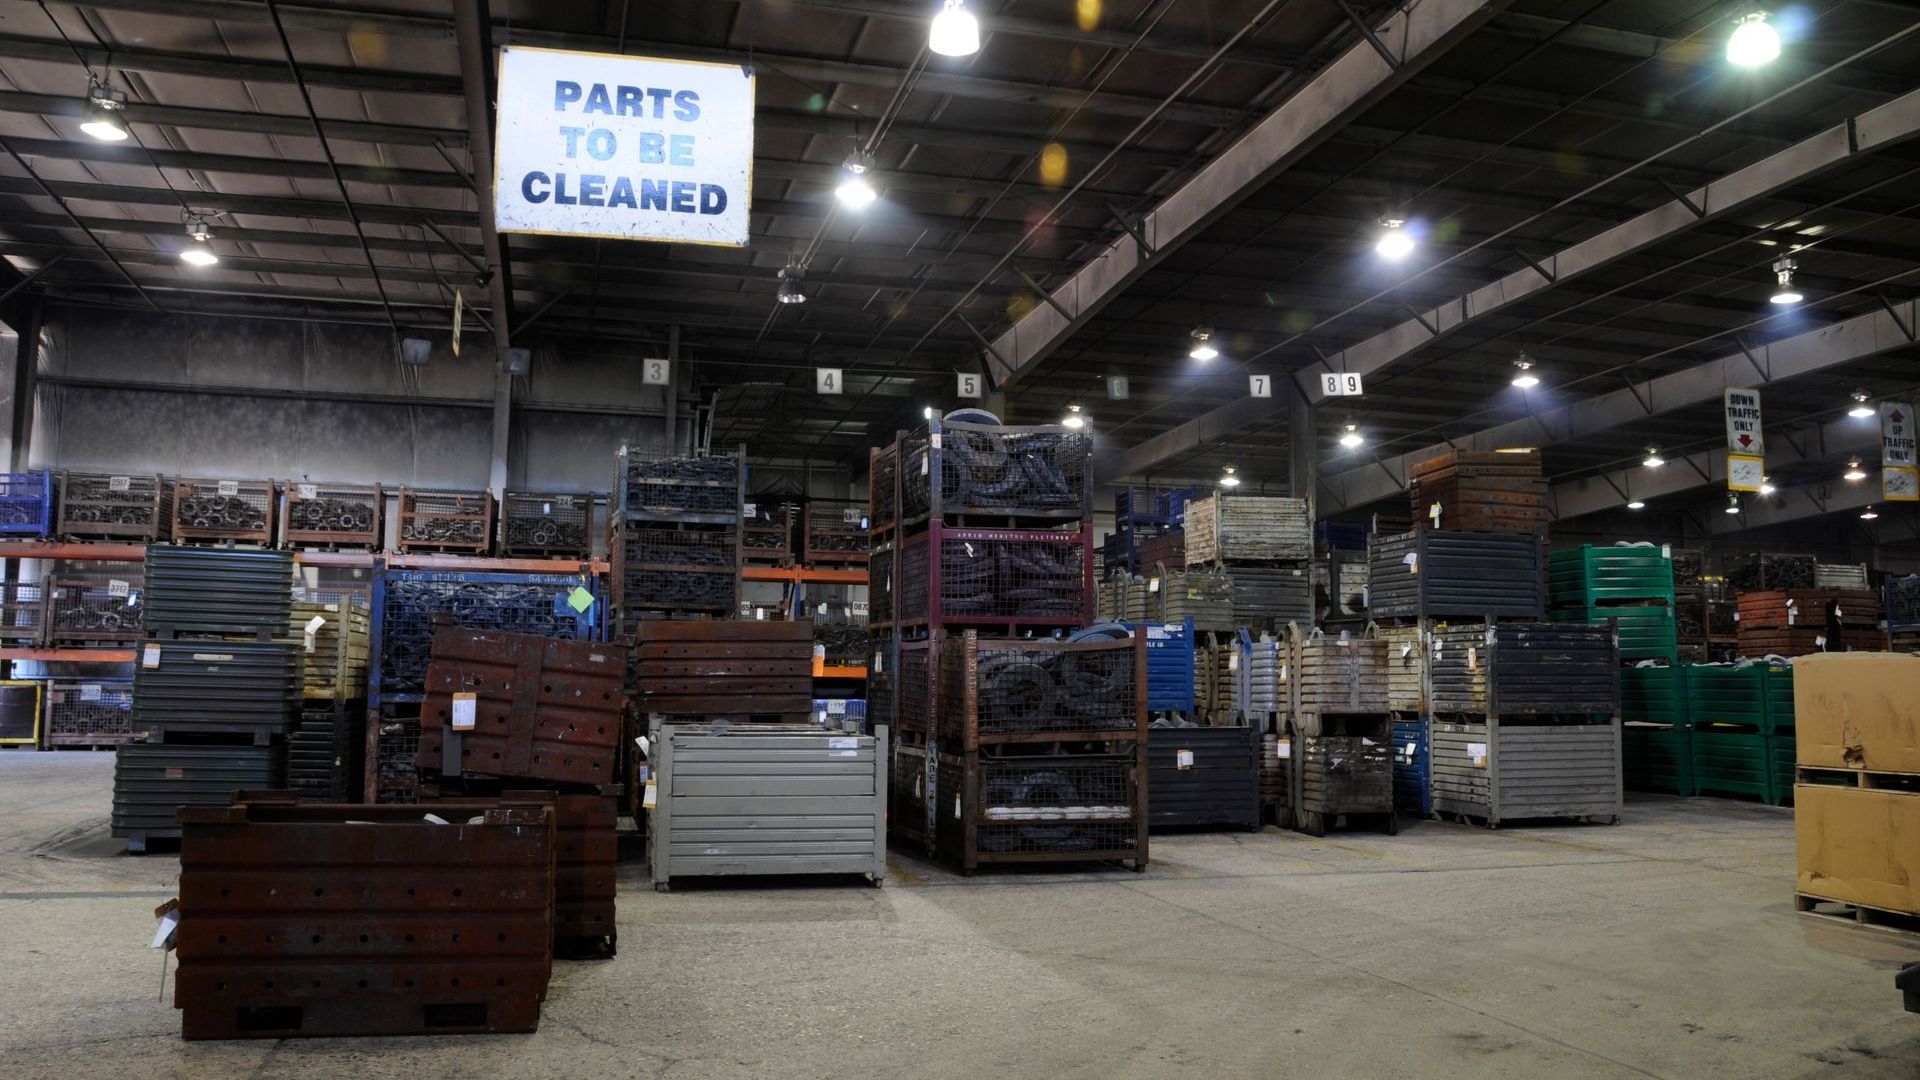 Warehouse of parts to be cleaned